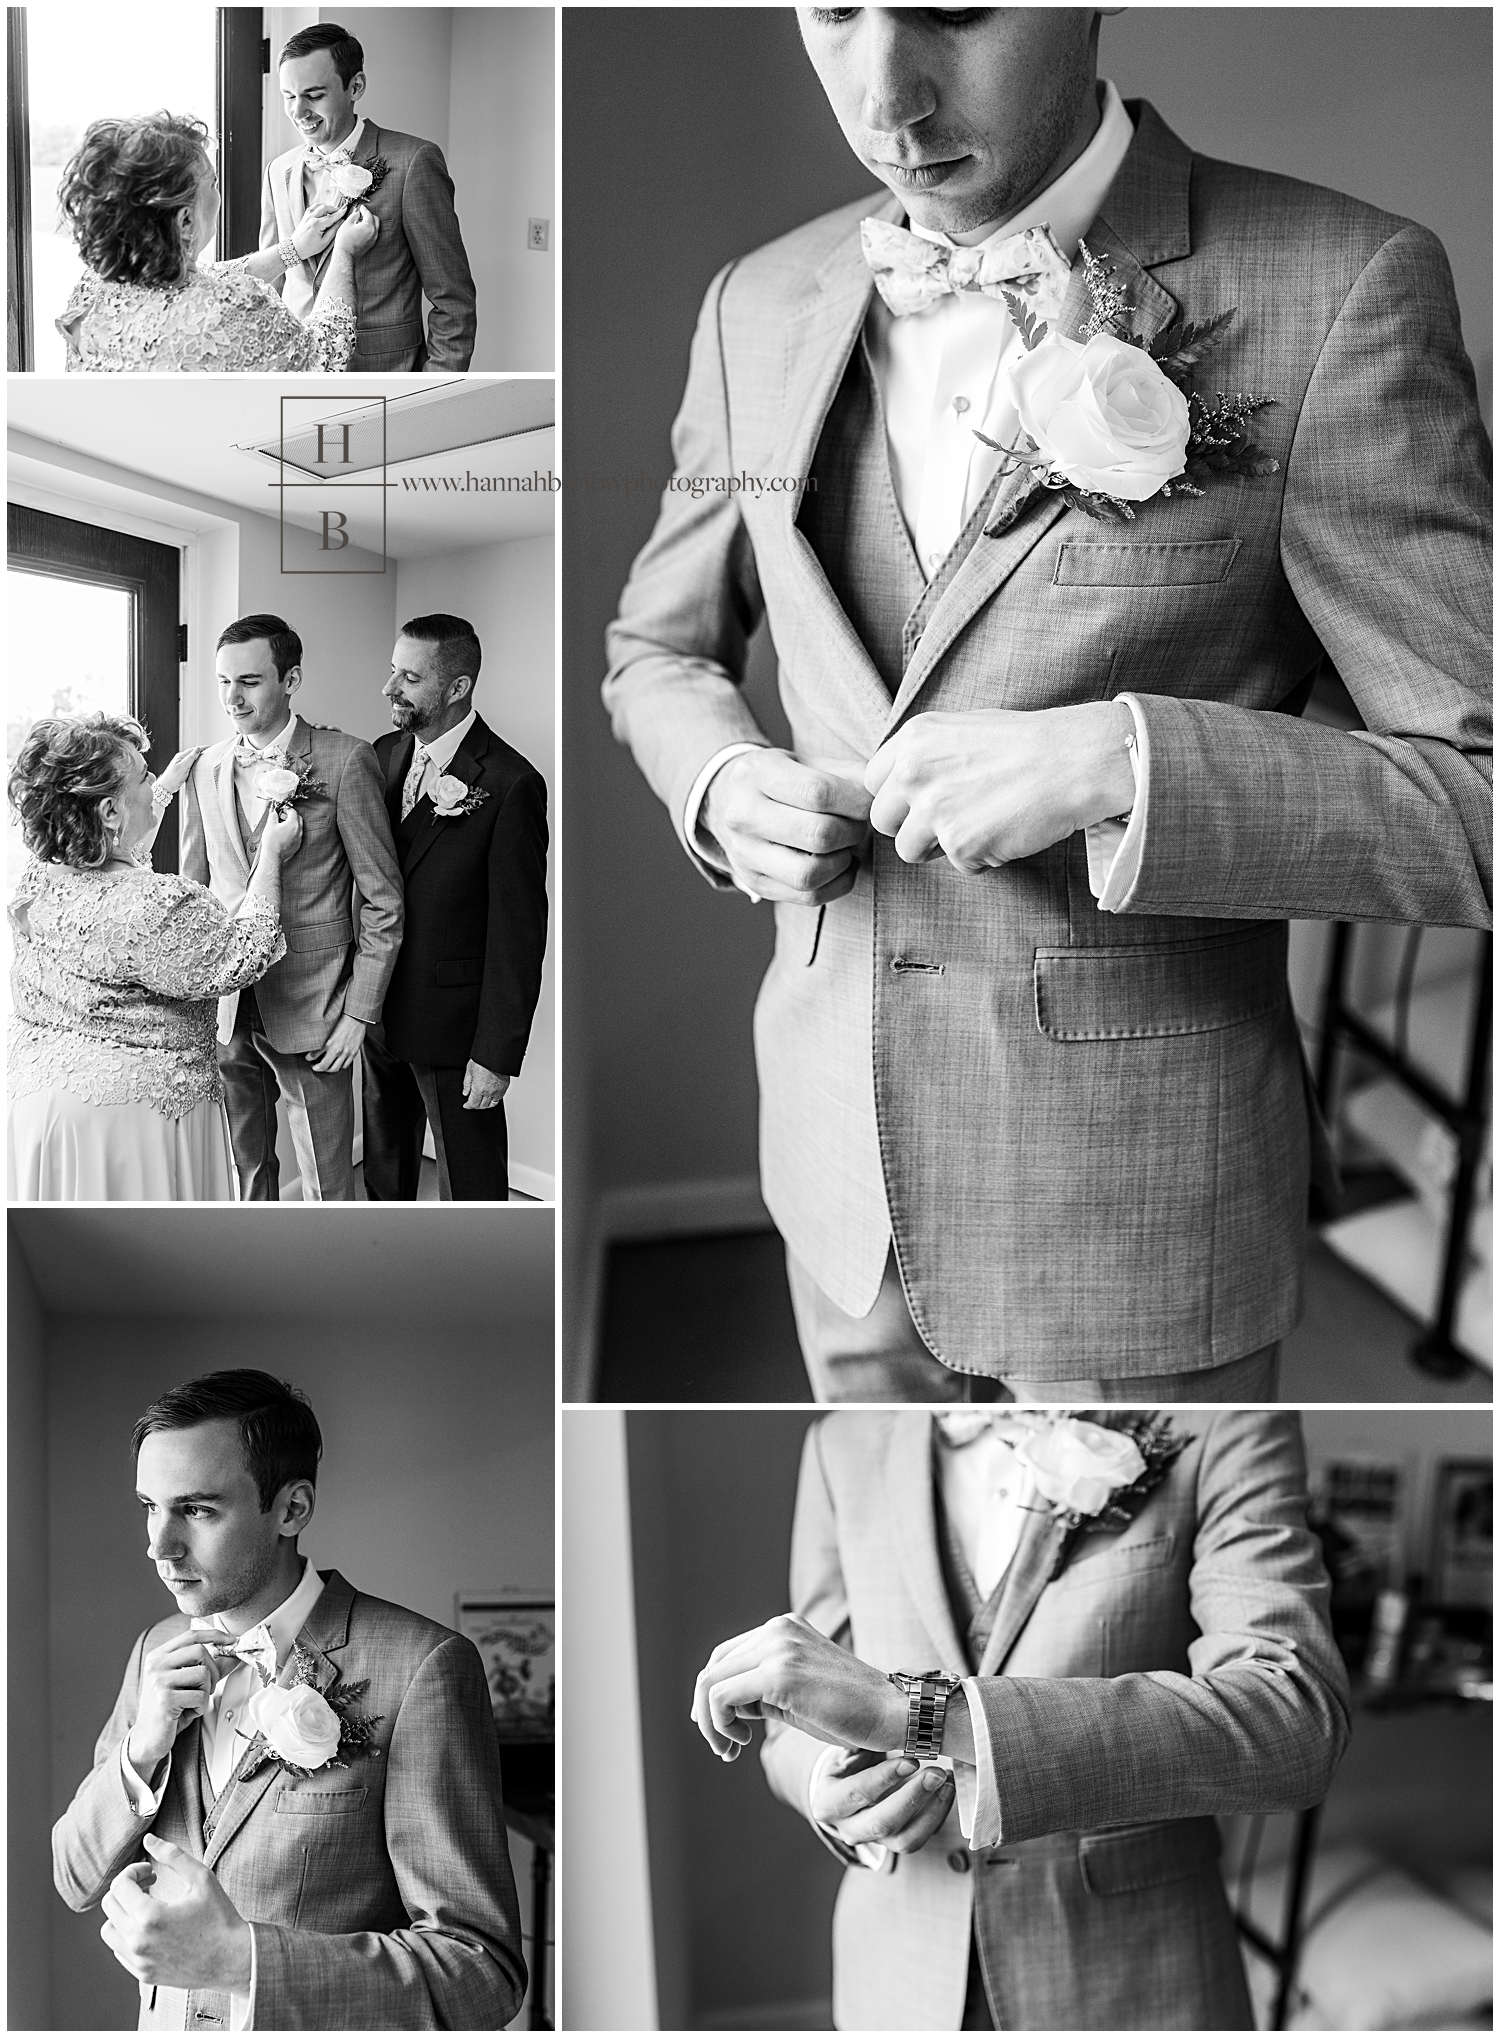 Black and white photos of groom getting ready with help of mom and dad.